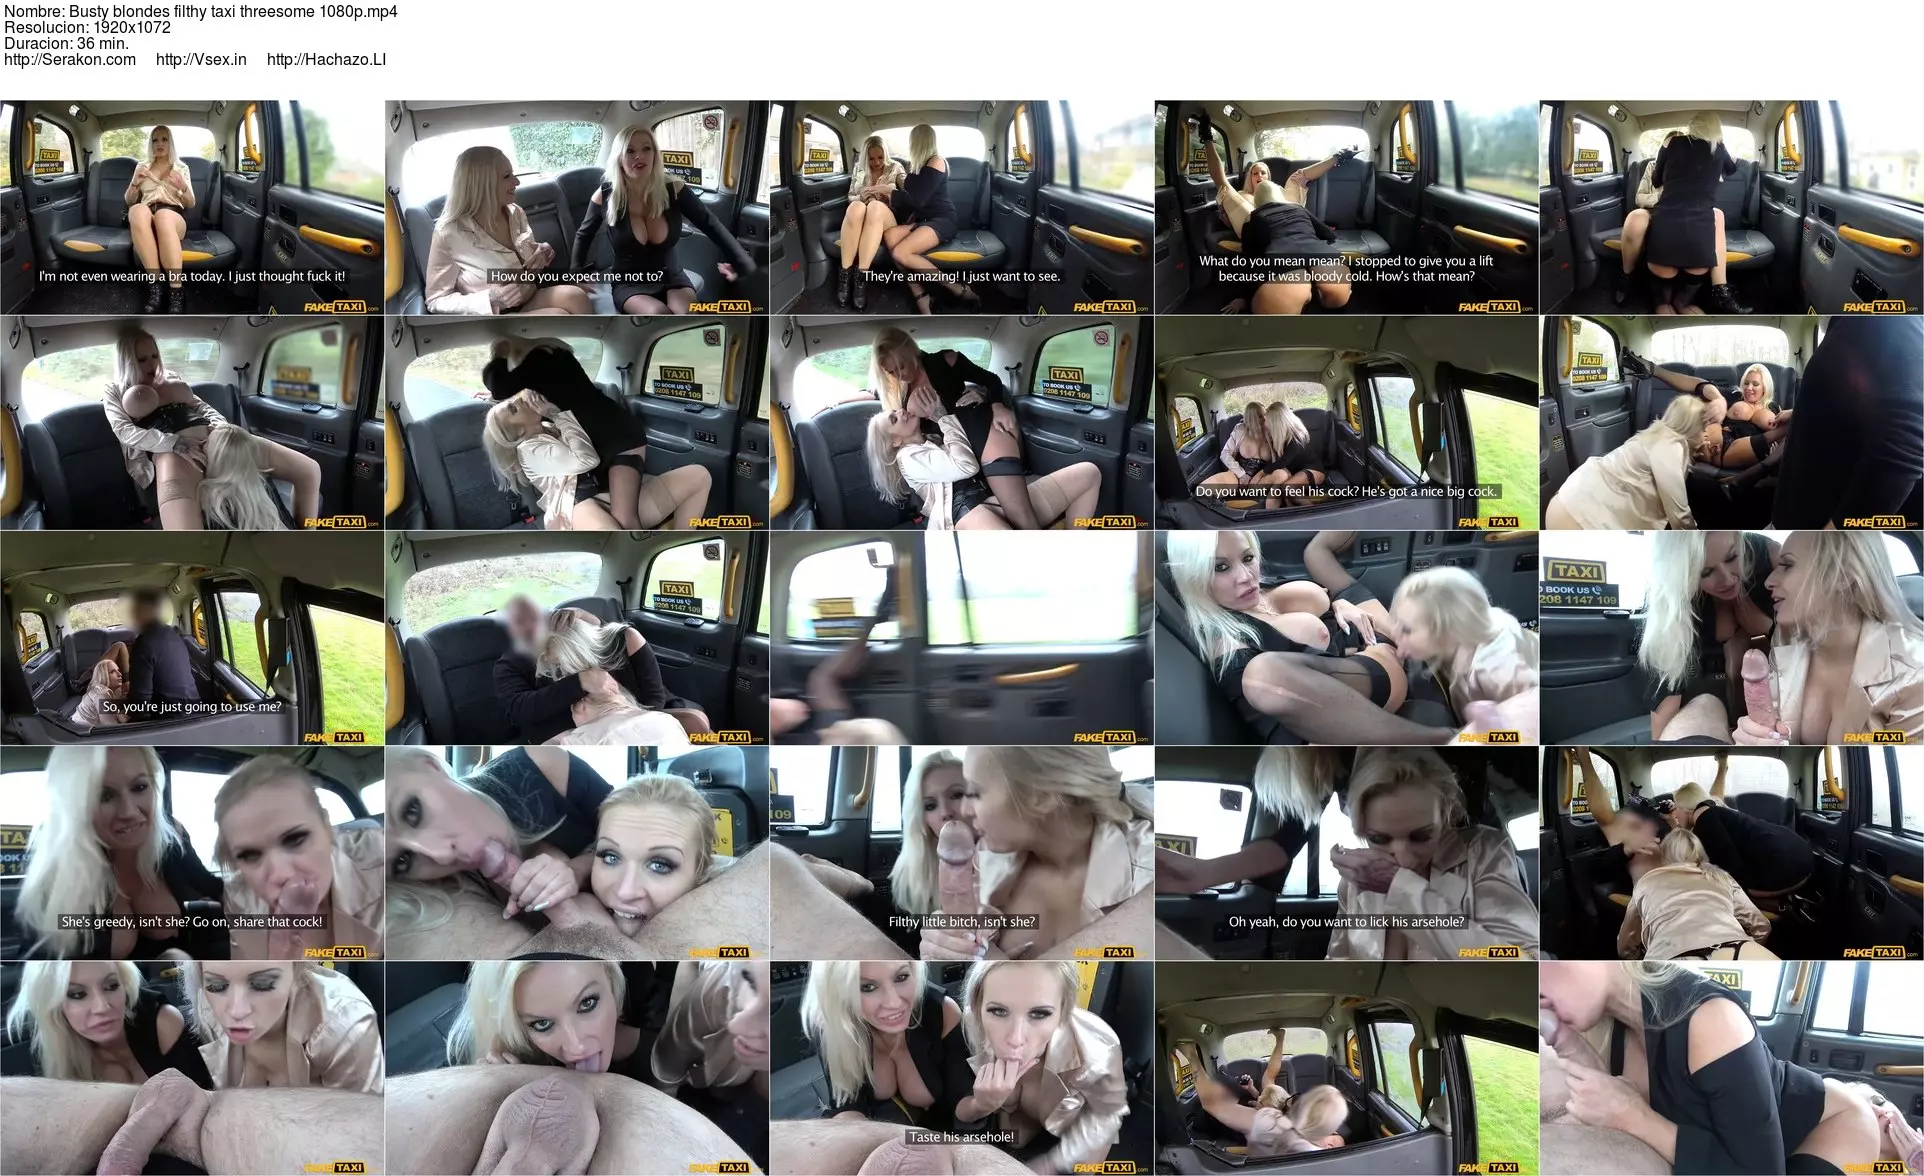 Busty blondes filthy taxi threesome